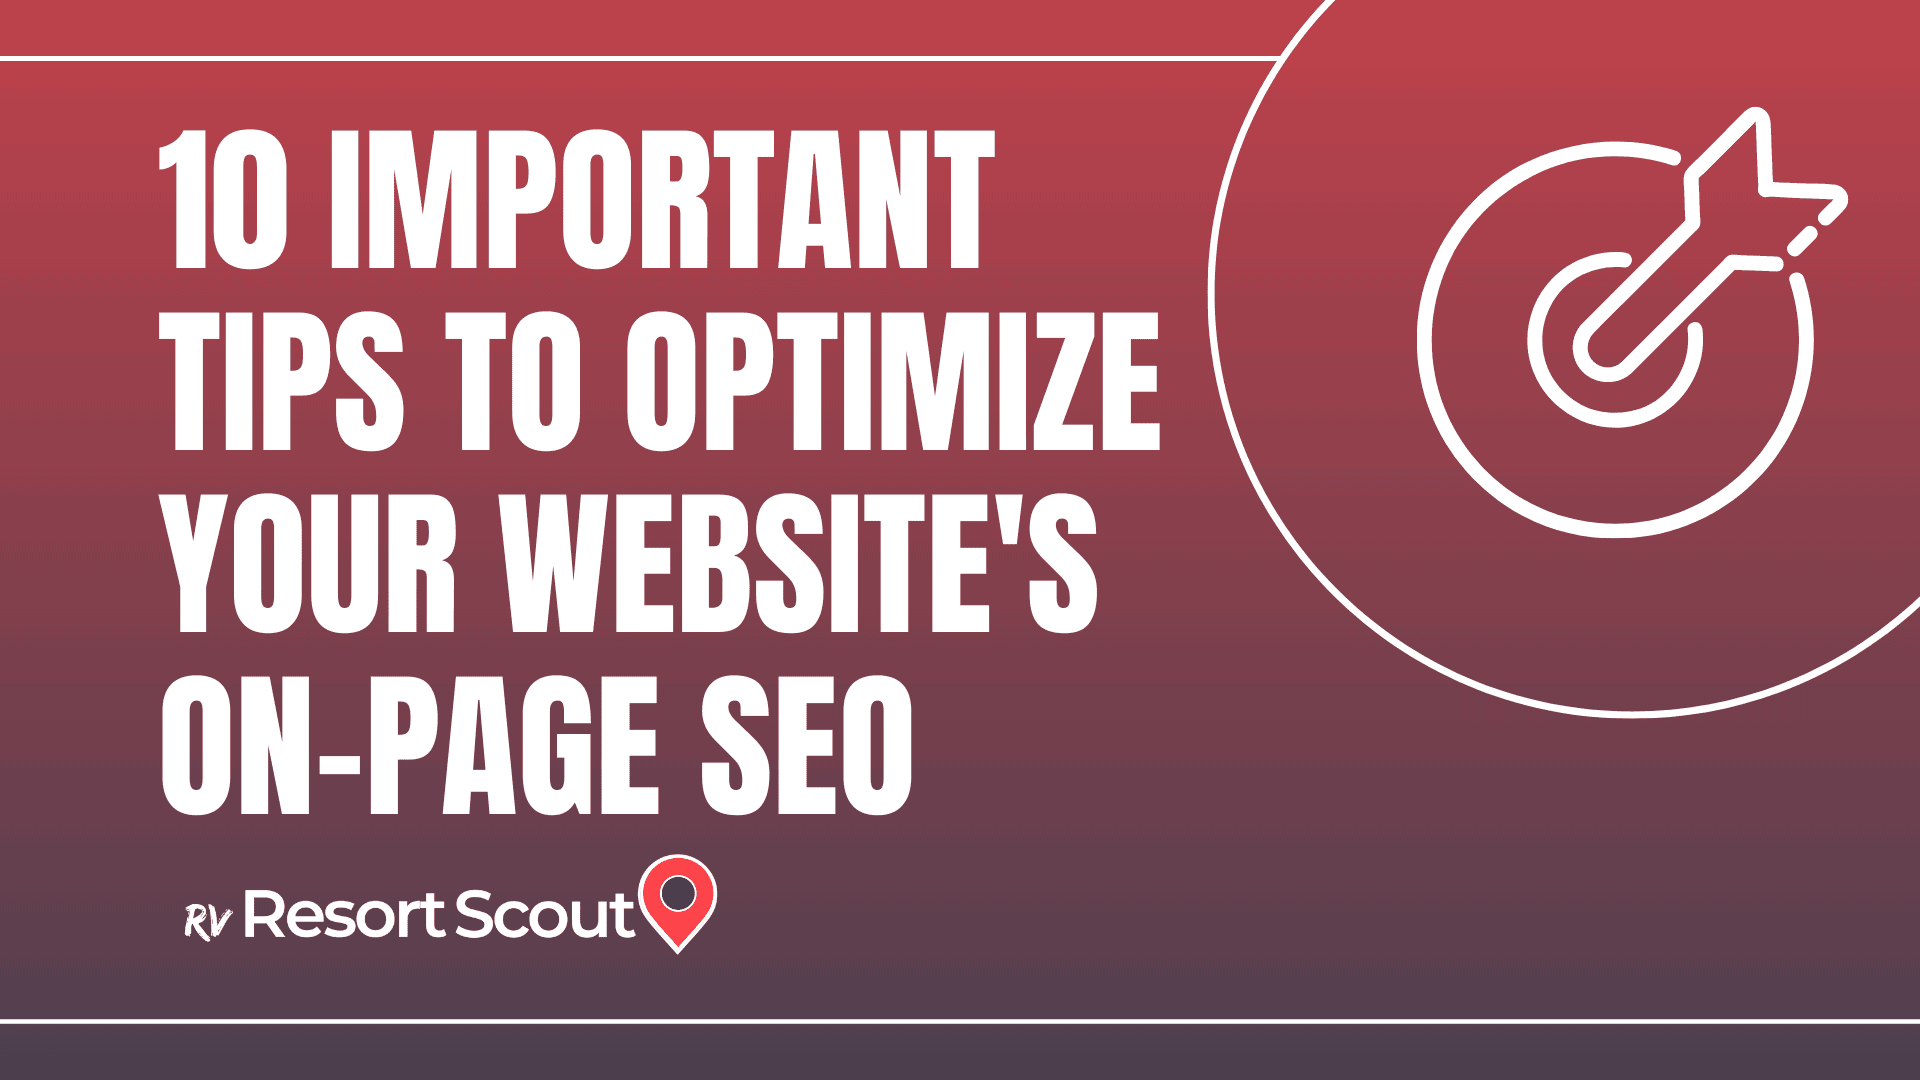 10 Important Tips To Optimize Your Website's On Page SEO